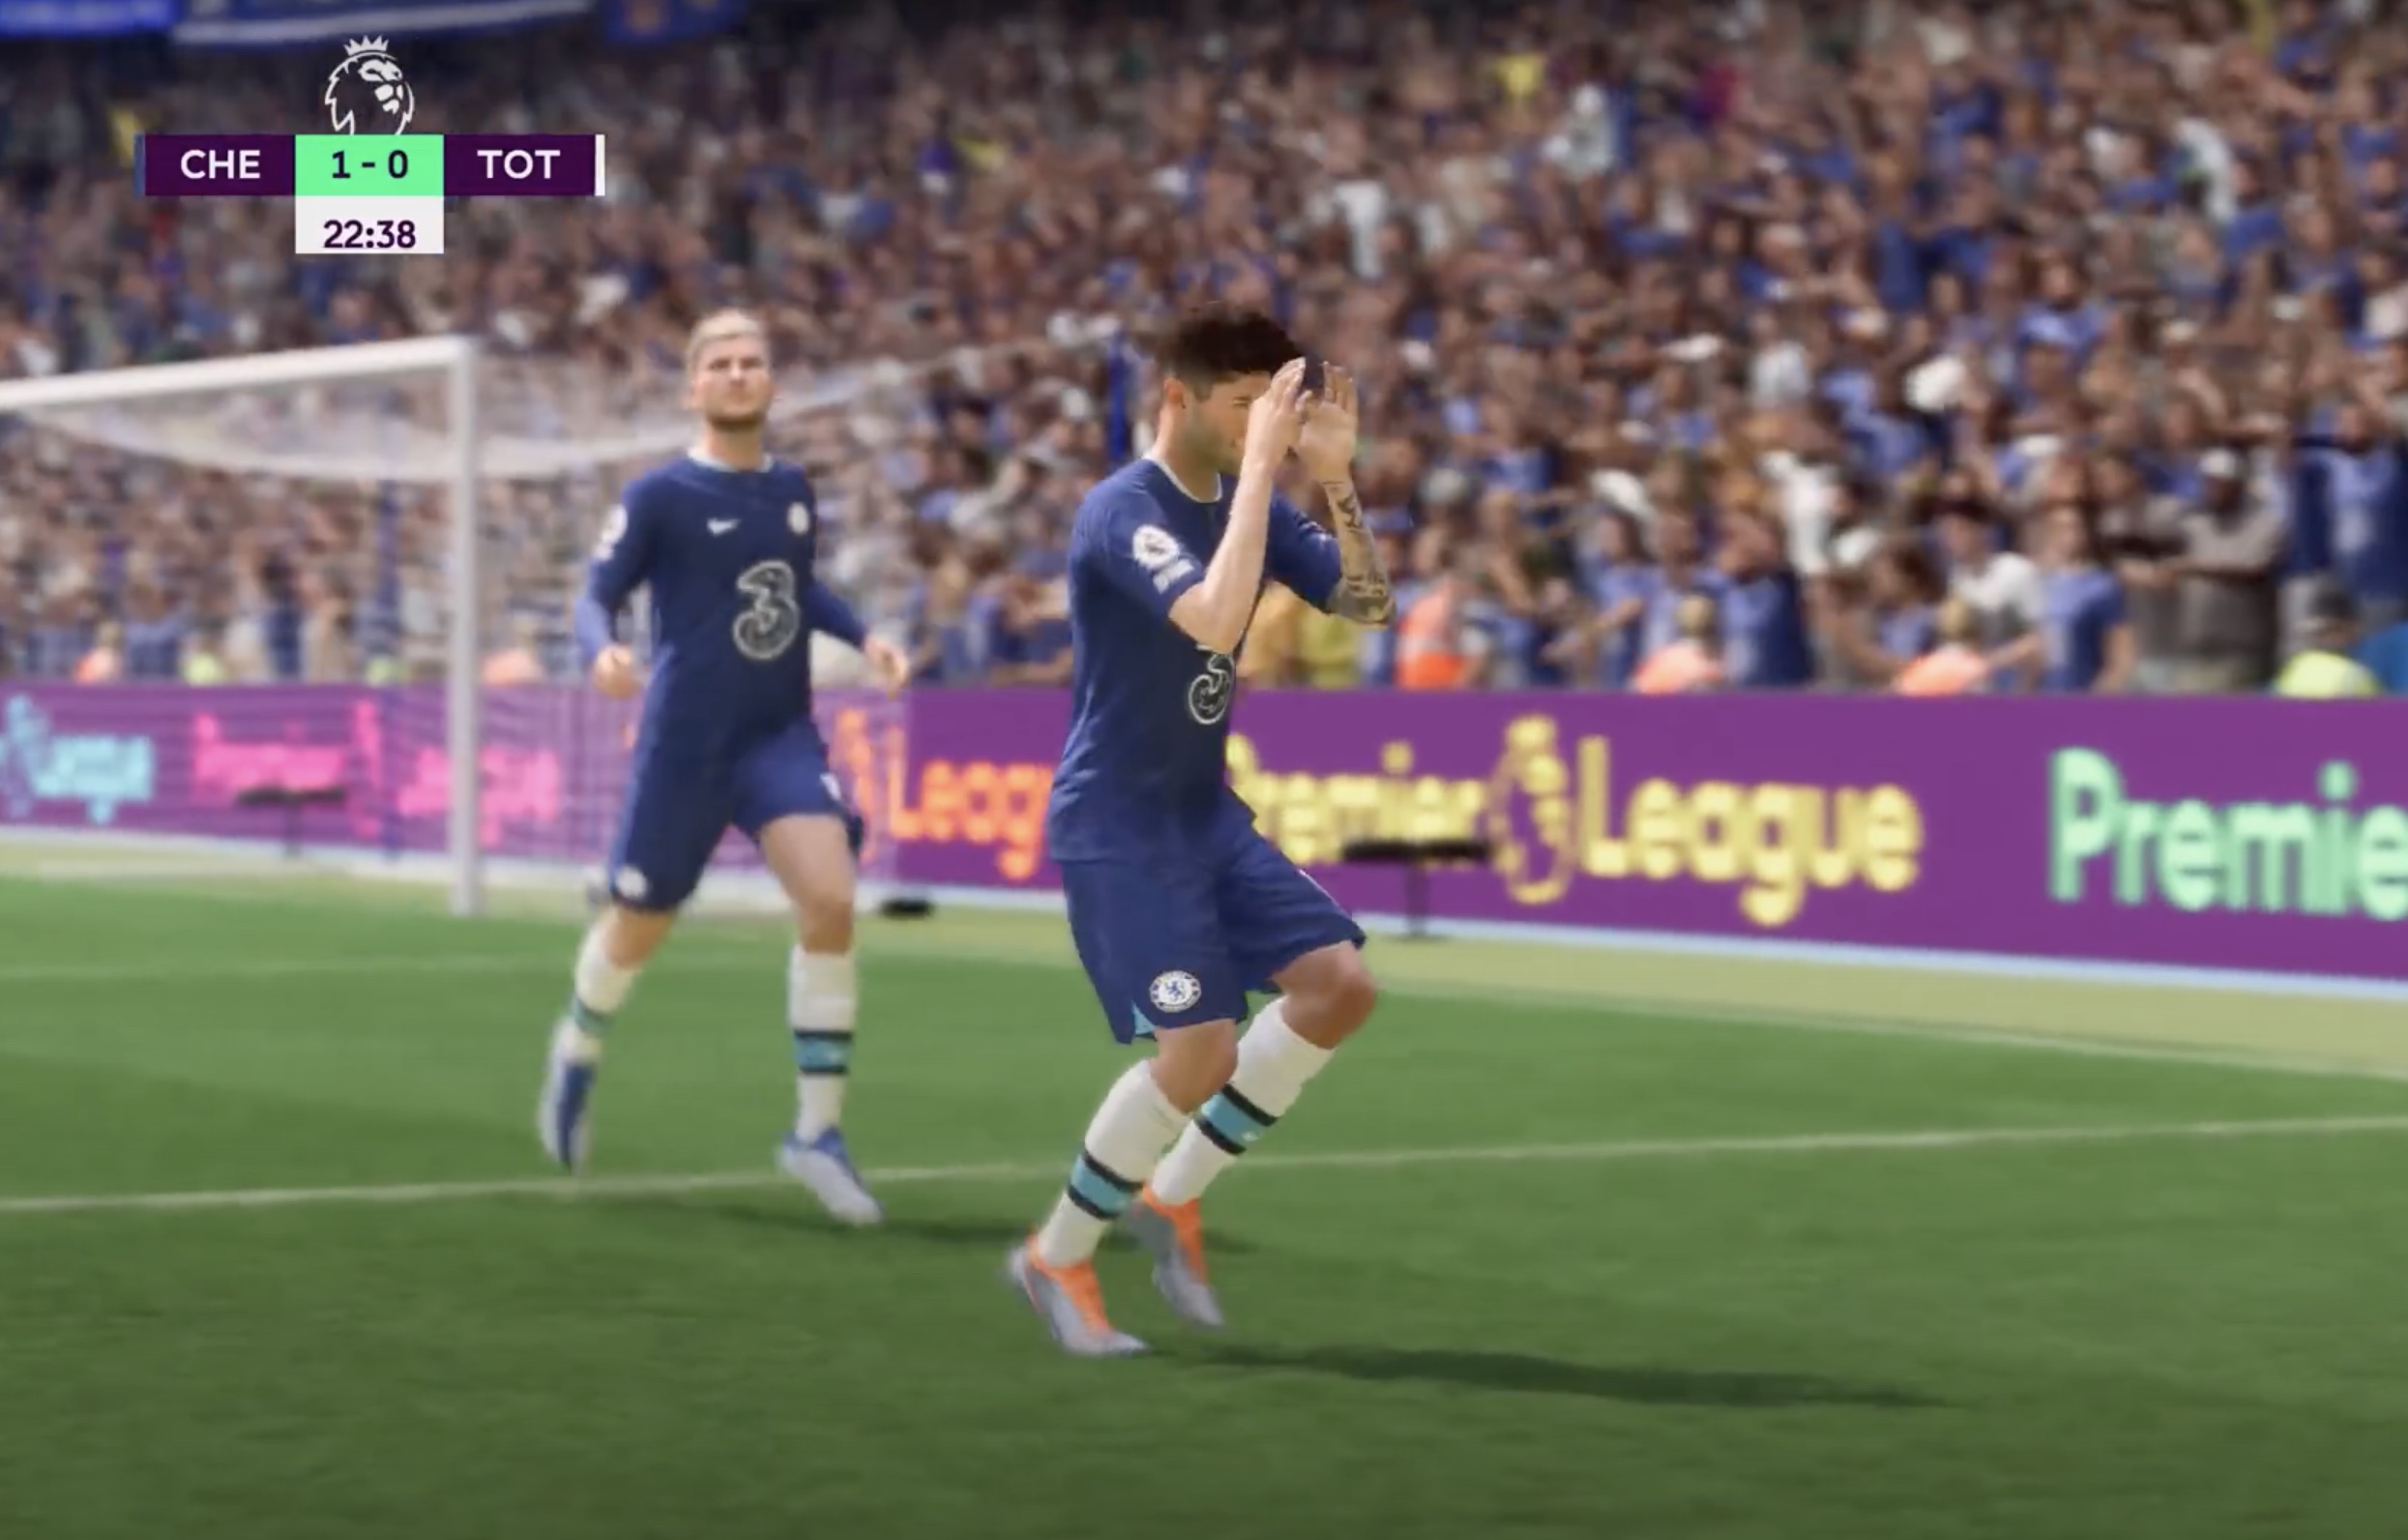 First FIFA 23 Title Update Released On PC